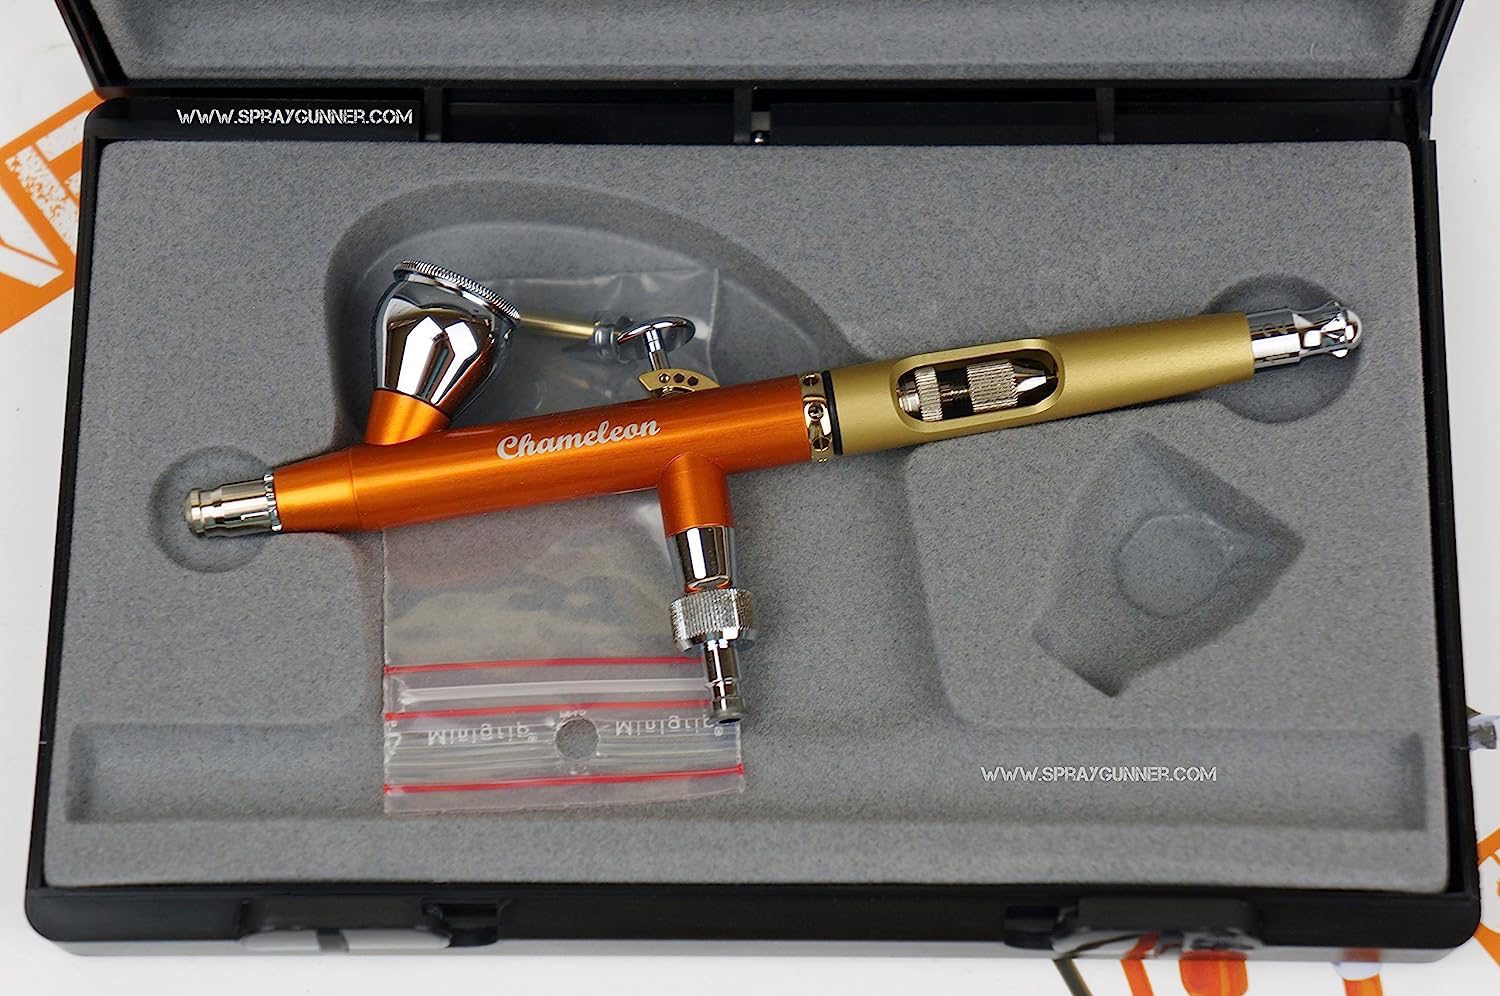 Harder & Steenbeck INFINITY CR Plus 2 in 1 0.2 + 0.4mm airbrush